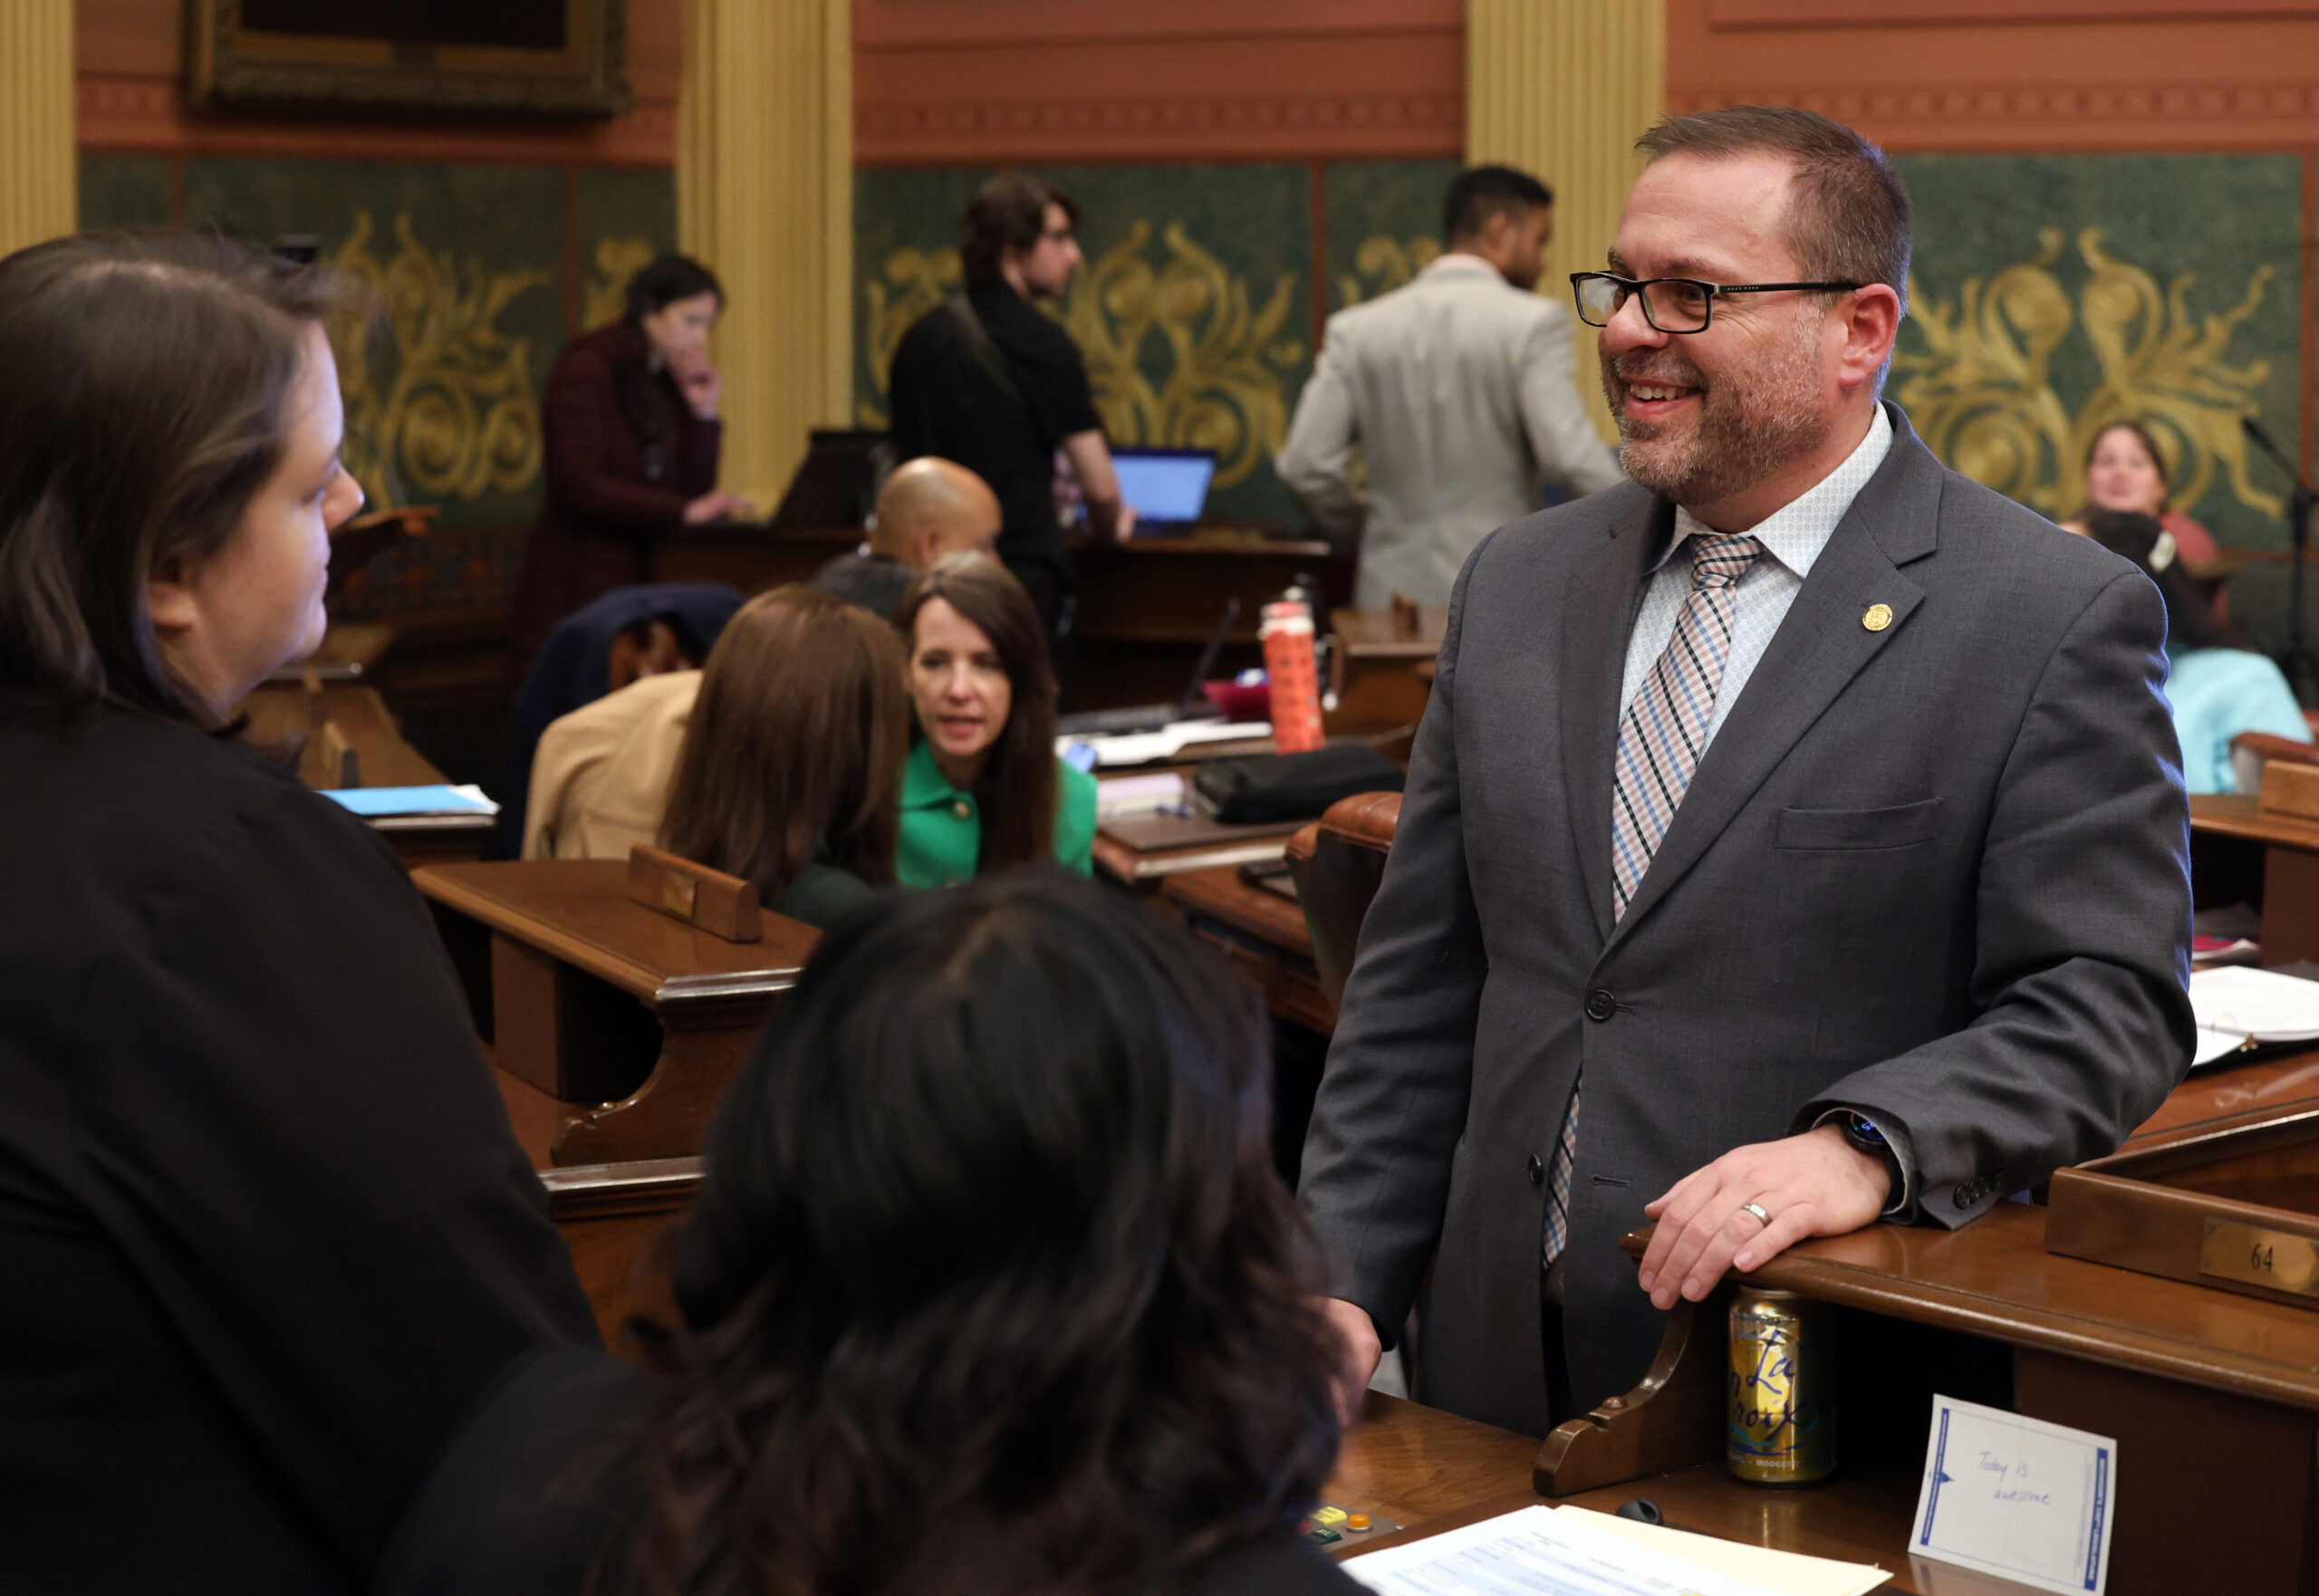 Rep. Mike McFall speaks with colleagues on the Michigan House floor.